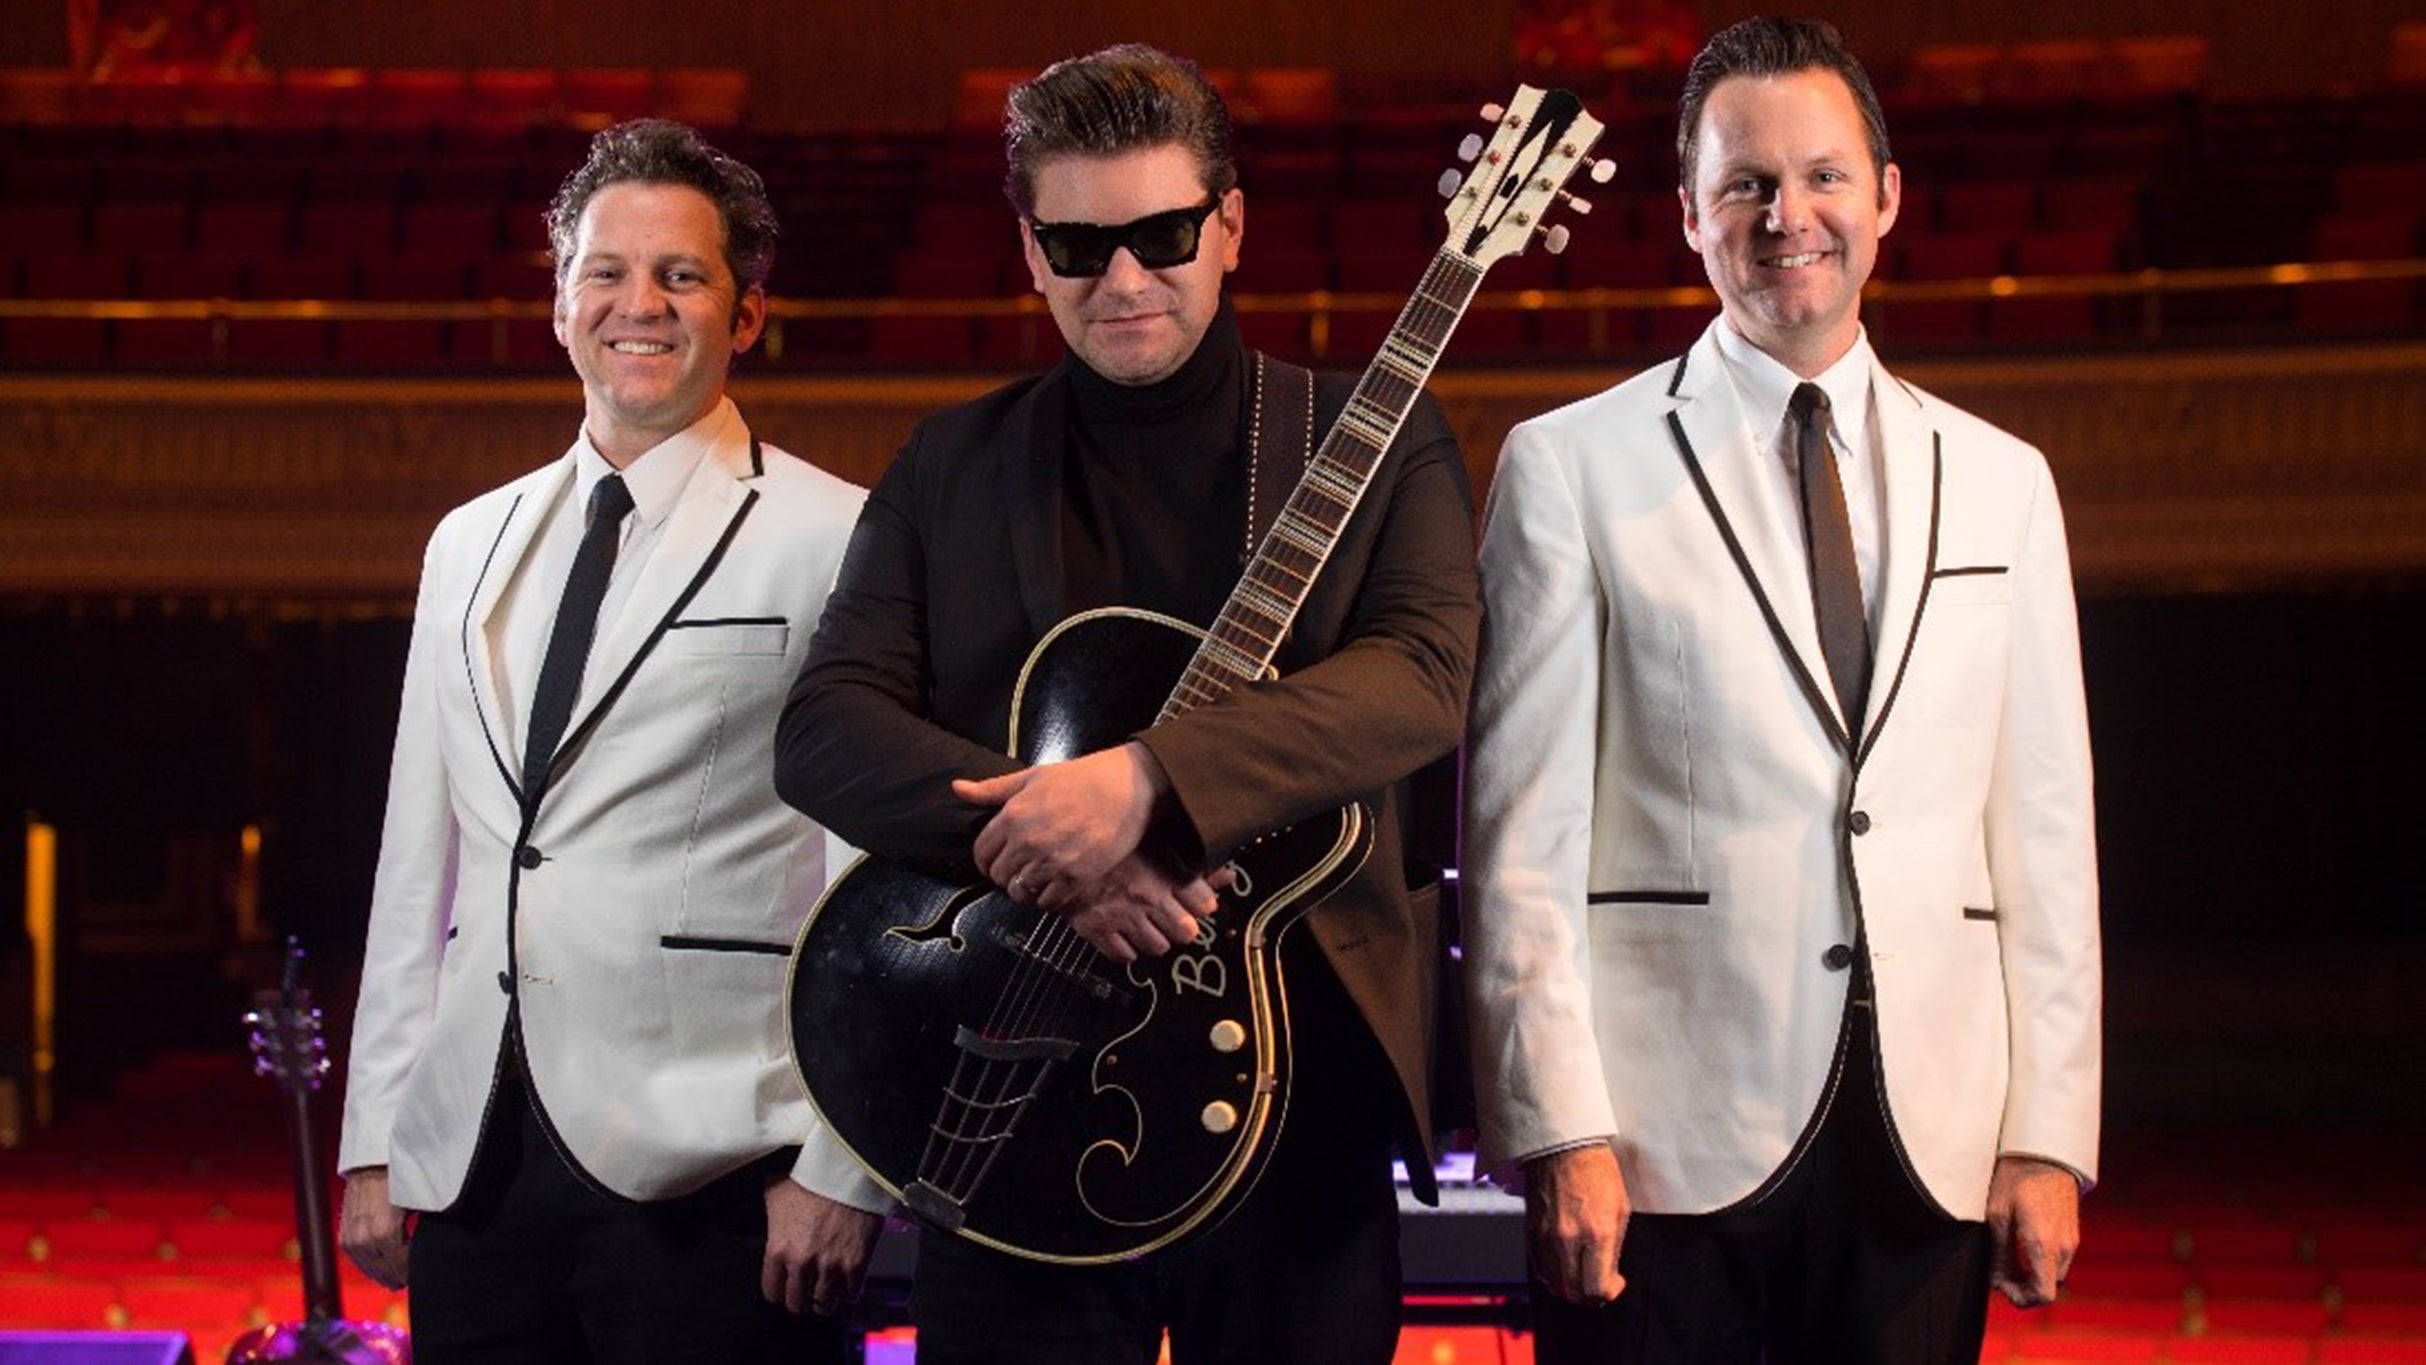 Roy Orbison and Everly Brothers Reimagined pre-sale code for real tickets in Atlantic City